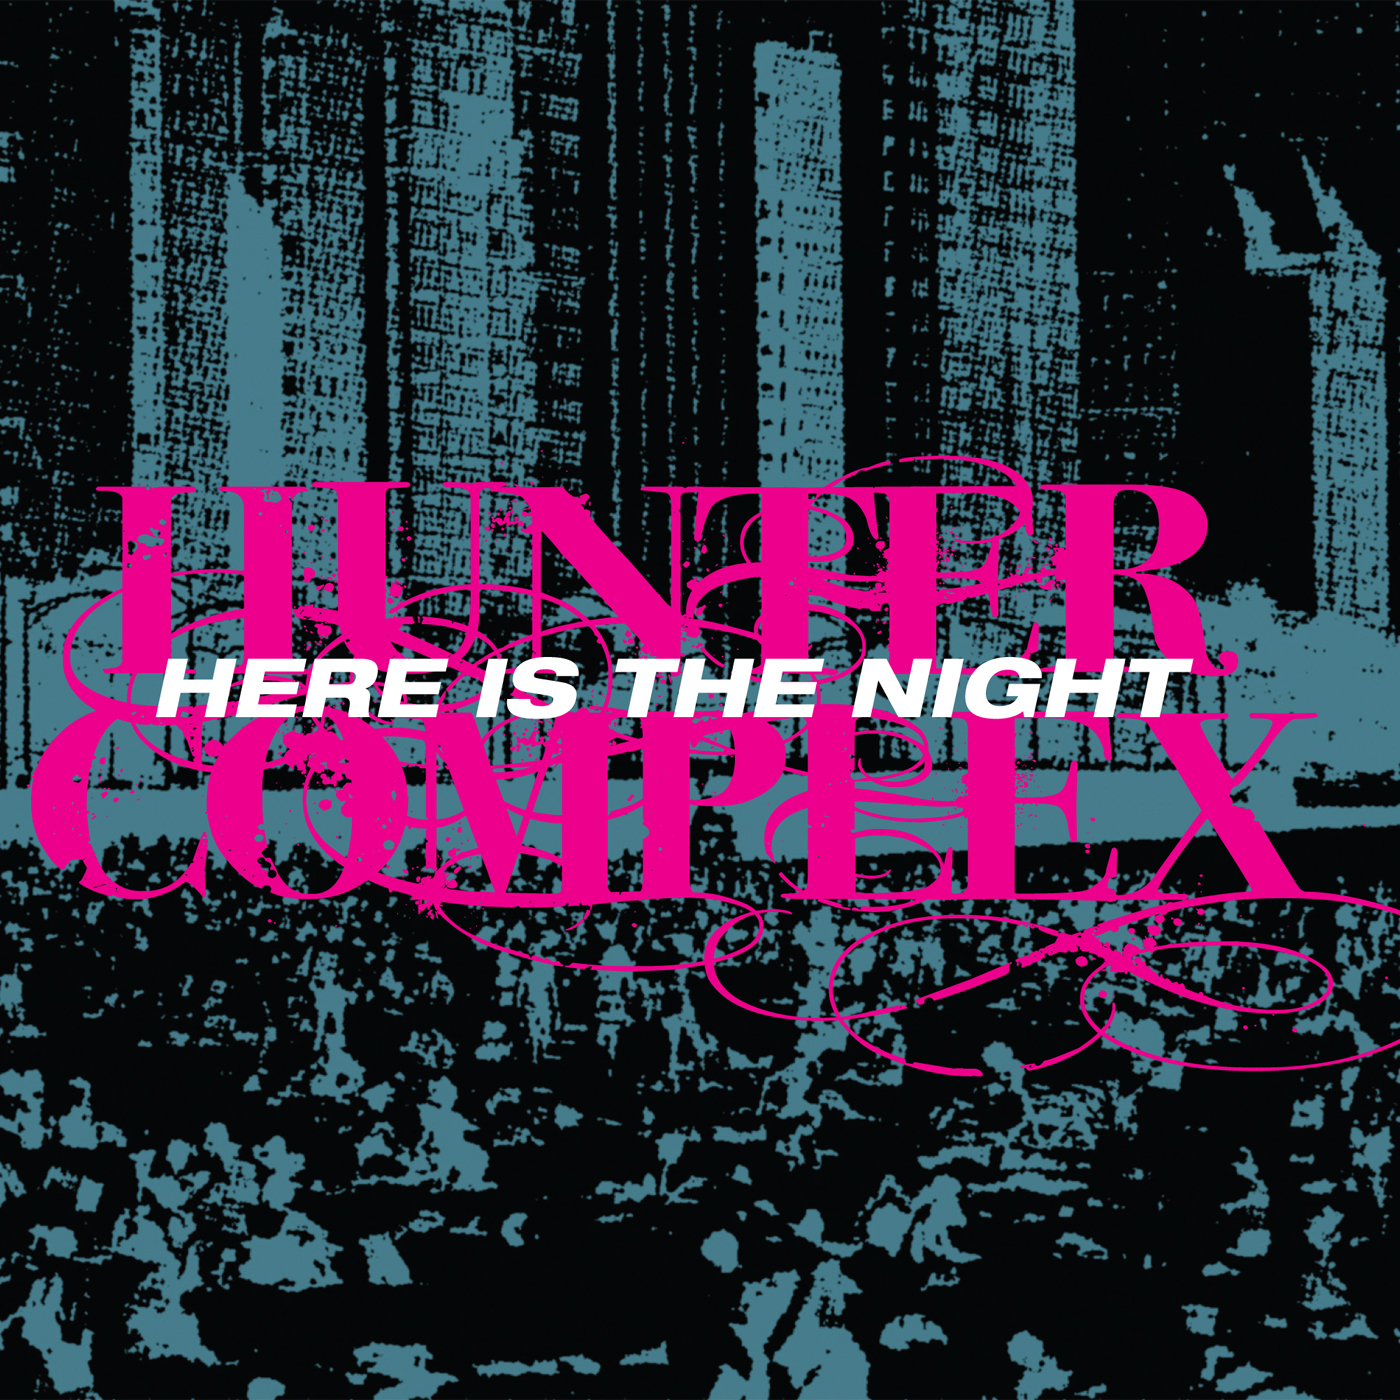 NM045: hunter complex - here is the night ep